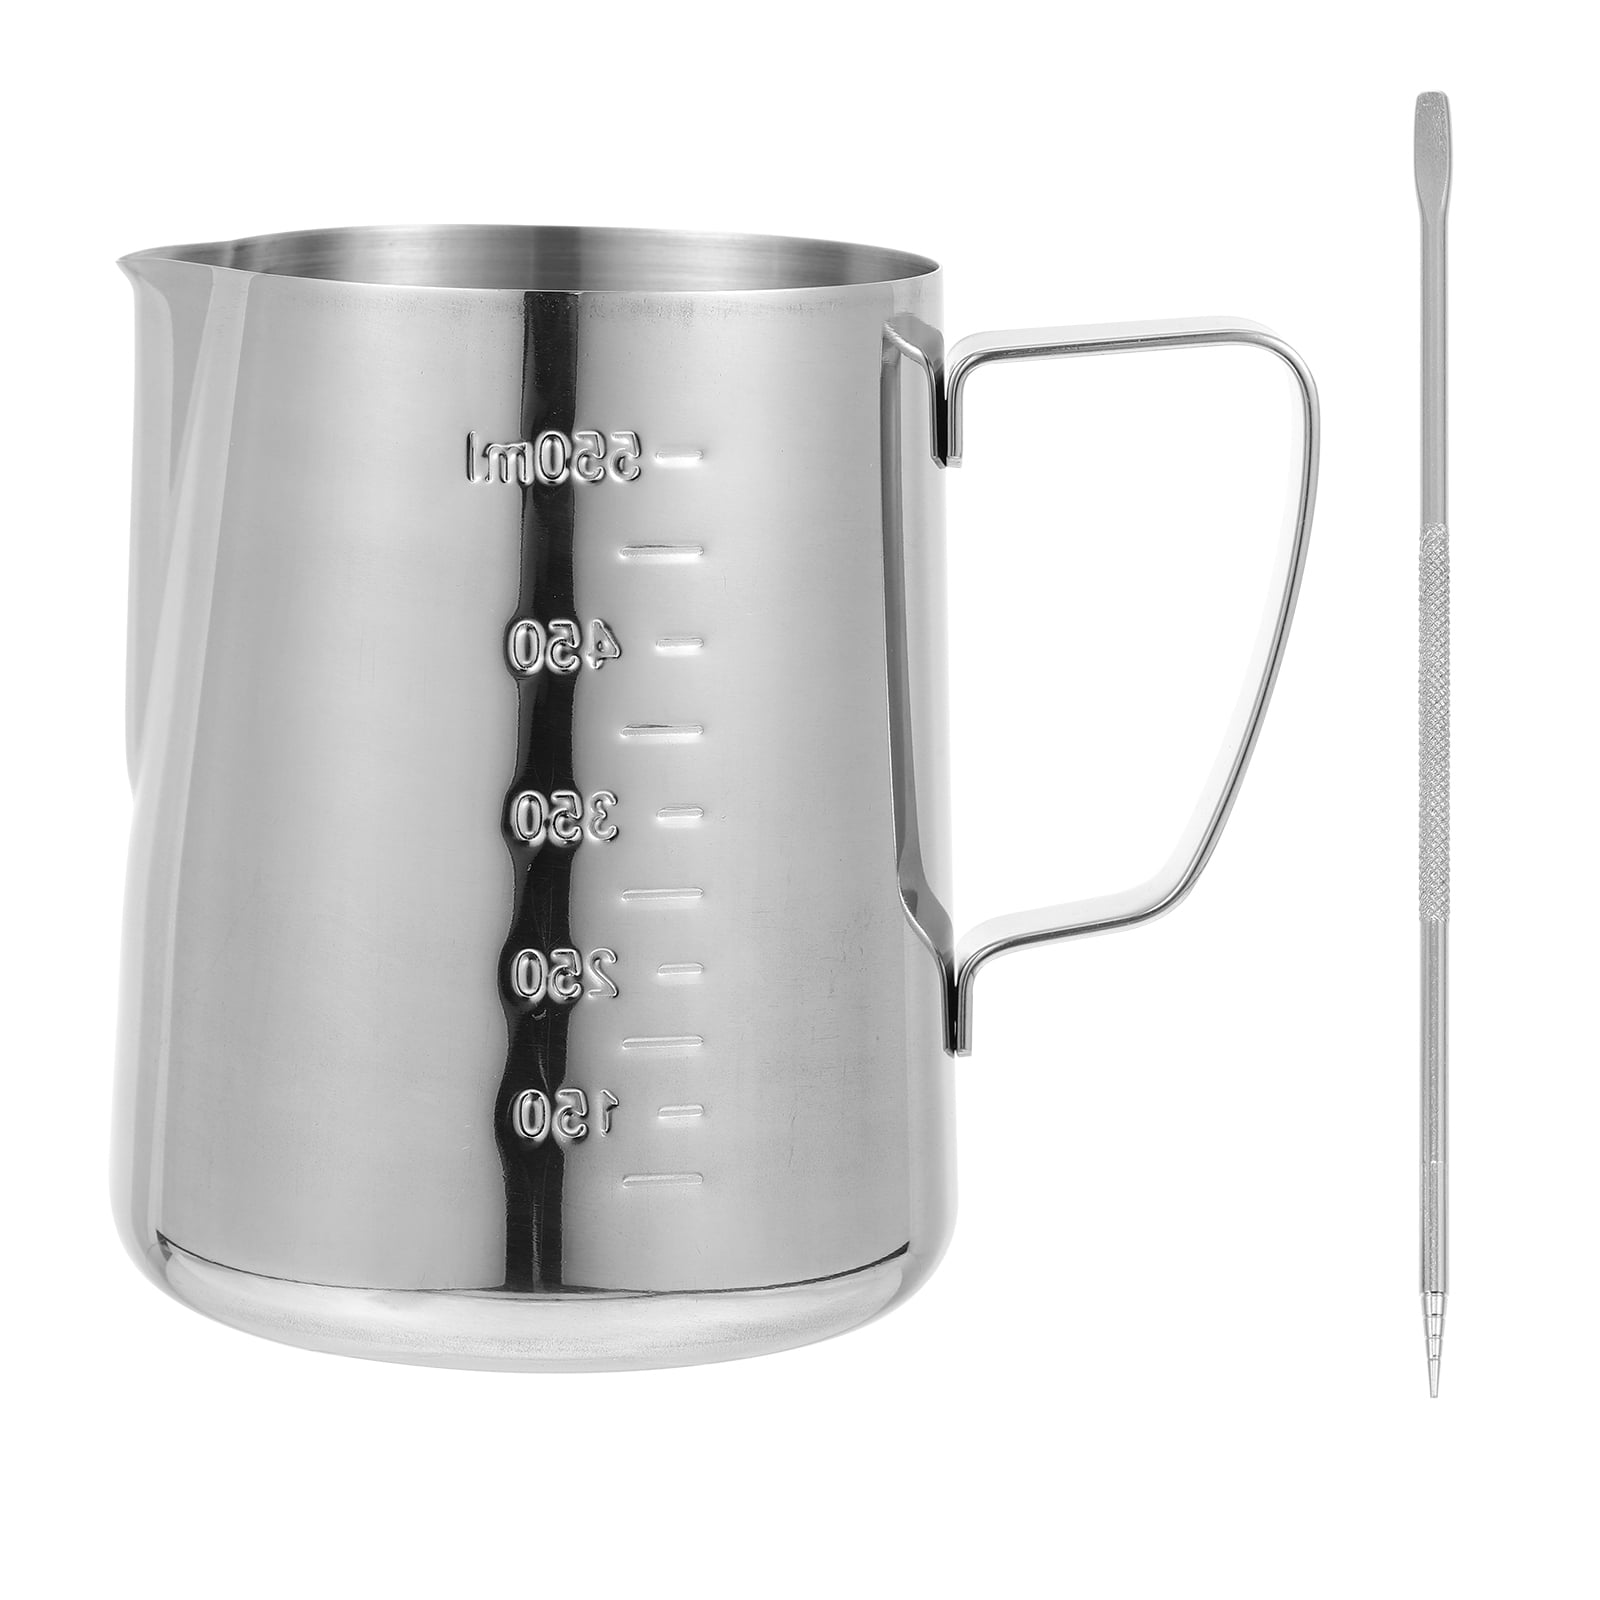 Measuring Cup, Stainless Steel Measuring Cups (64OZ/2 Liter- 8 Cup),  Heavy-Duty Frothing Pitcher, Milk Frothing Pitcher Milk Frother Cup with  Marking